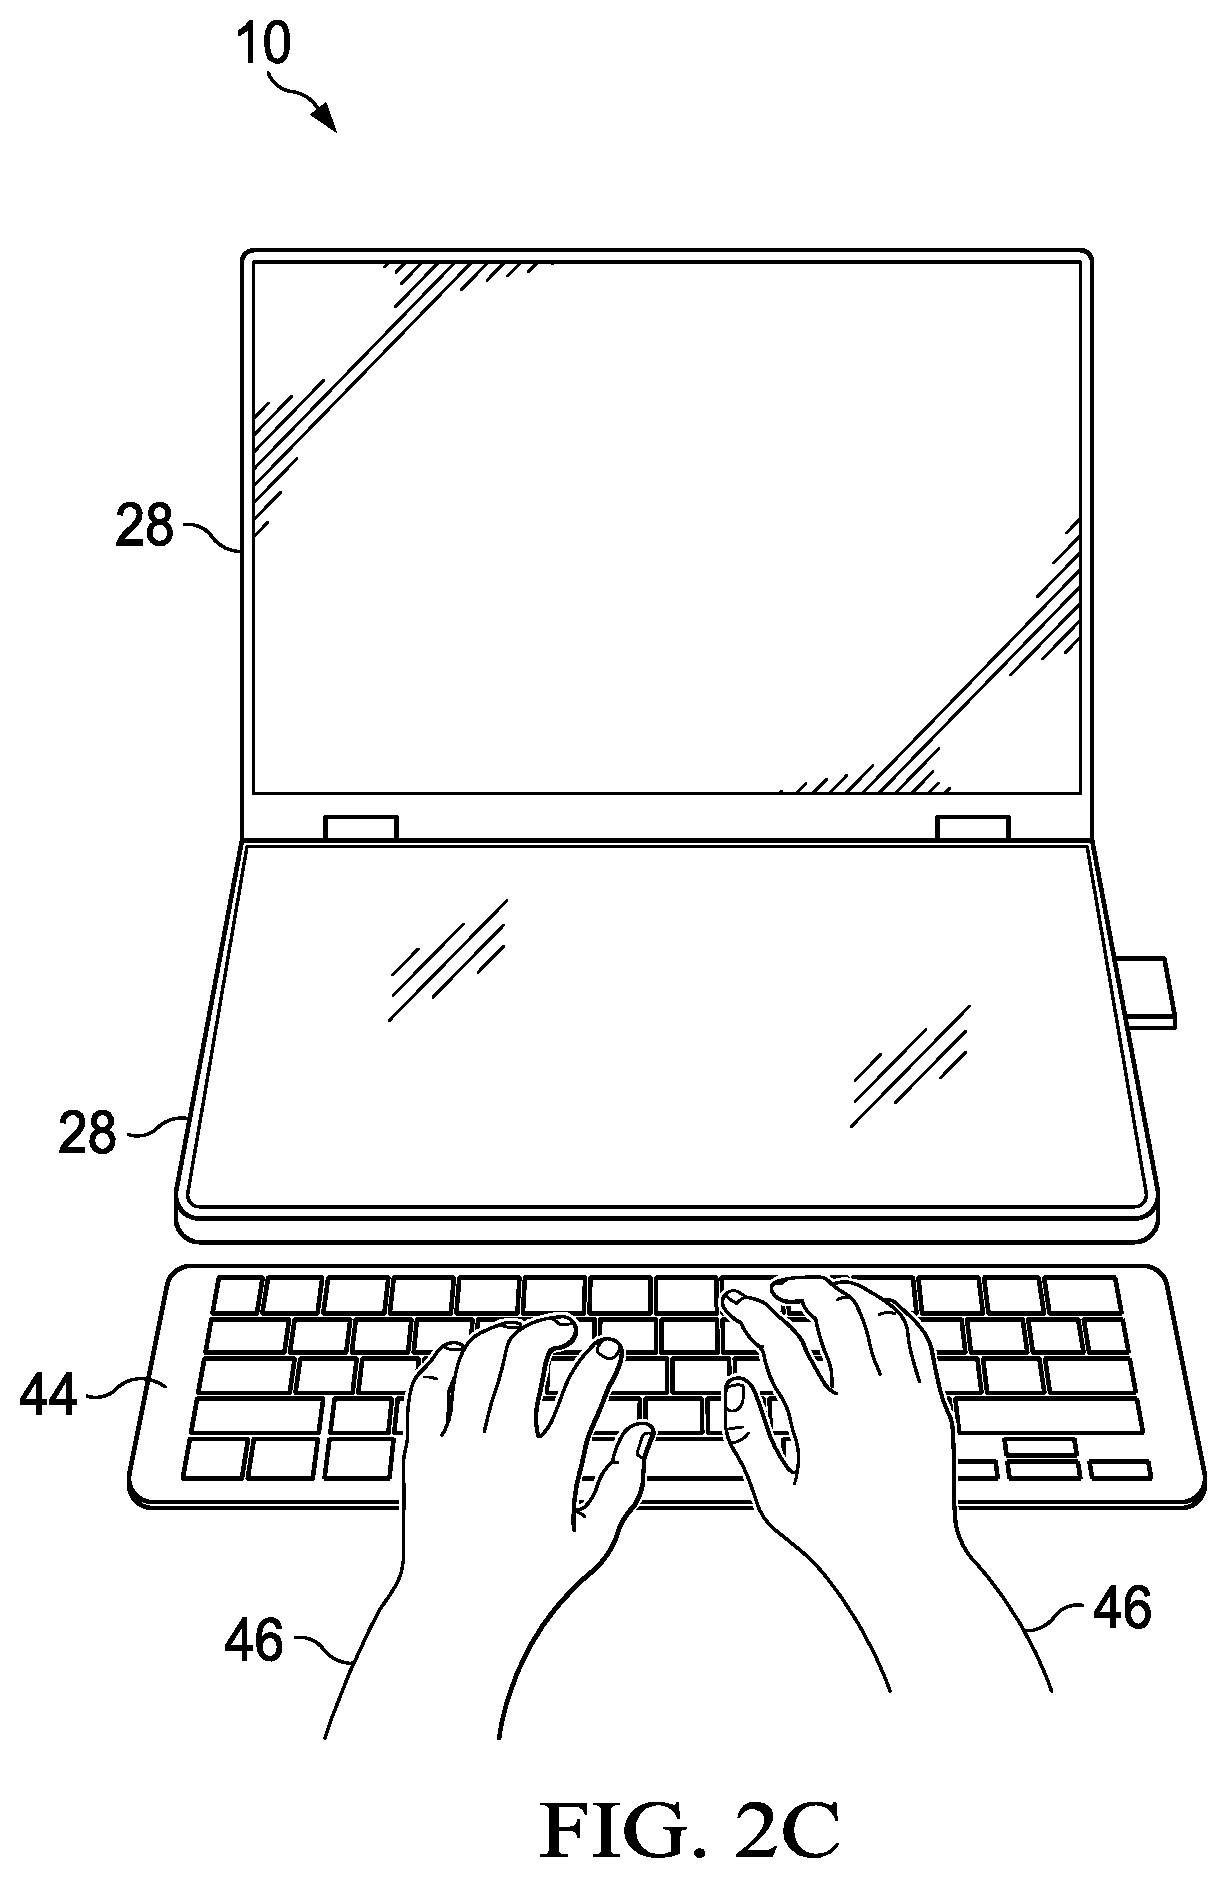 Dynamic keyboard support at support and display surfaces